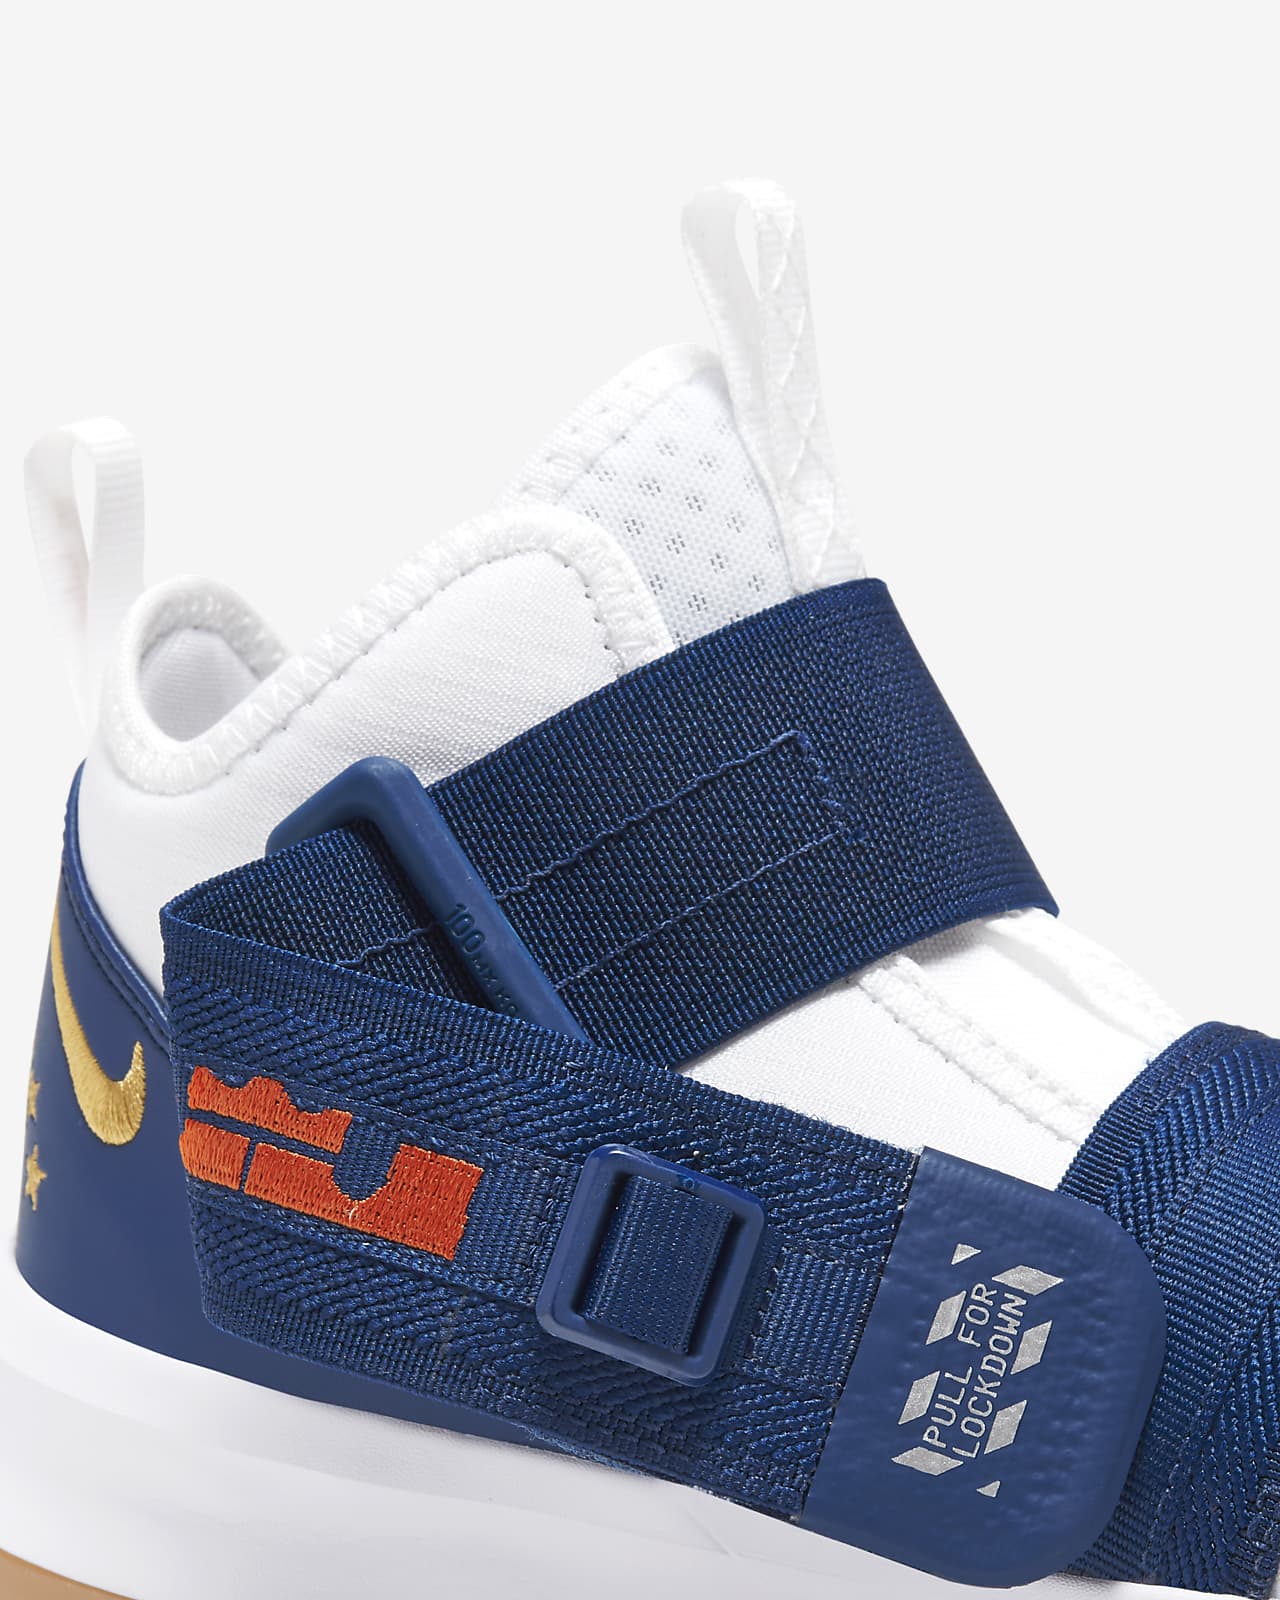 lebron soldier white and blue